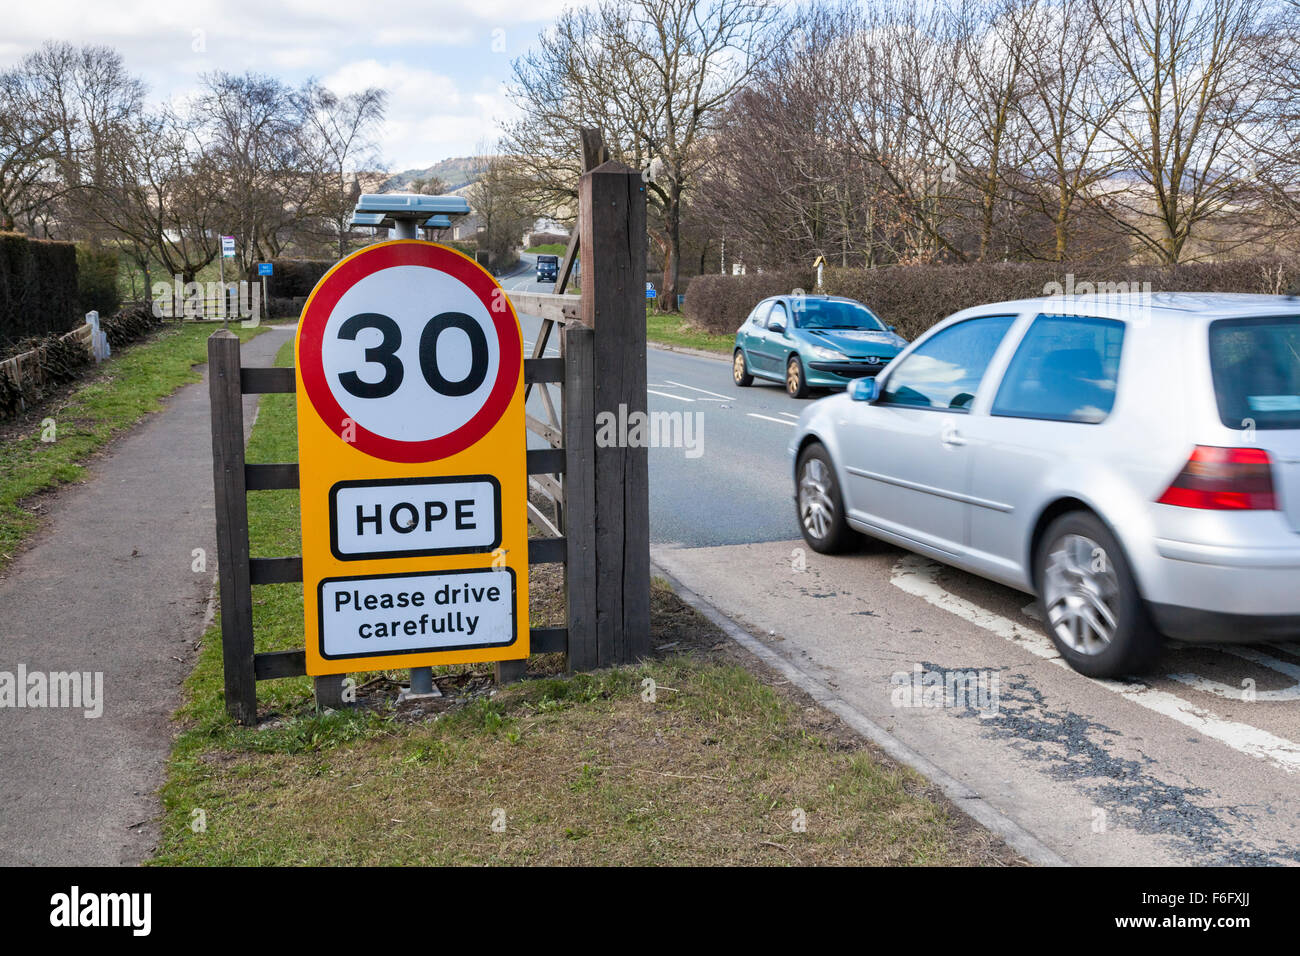 30 mph speed limit road sign with a request to please drive carefully at Hope in Derbyshire, England, UK Stock Photo